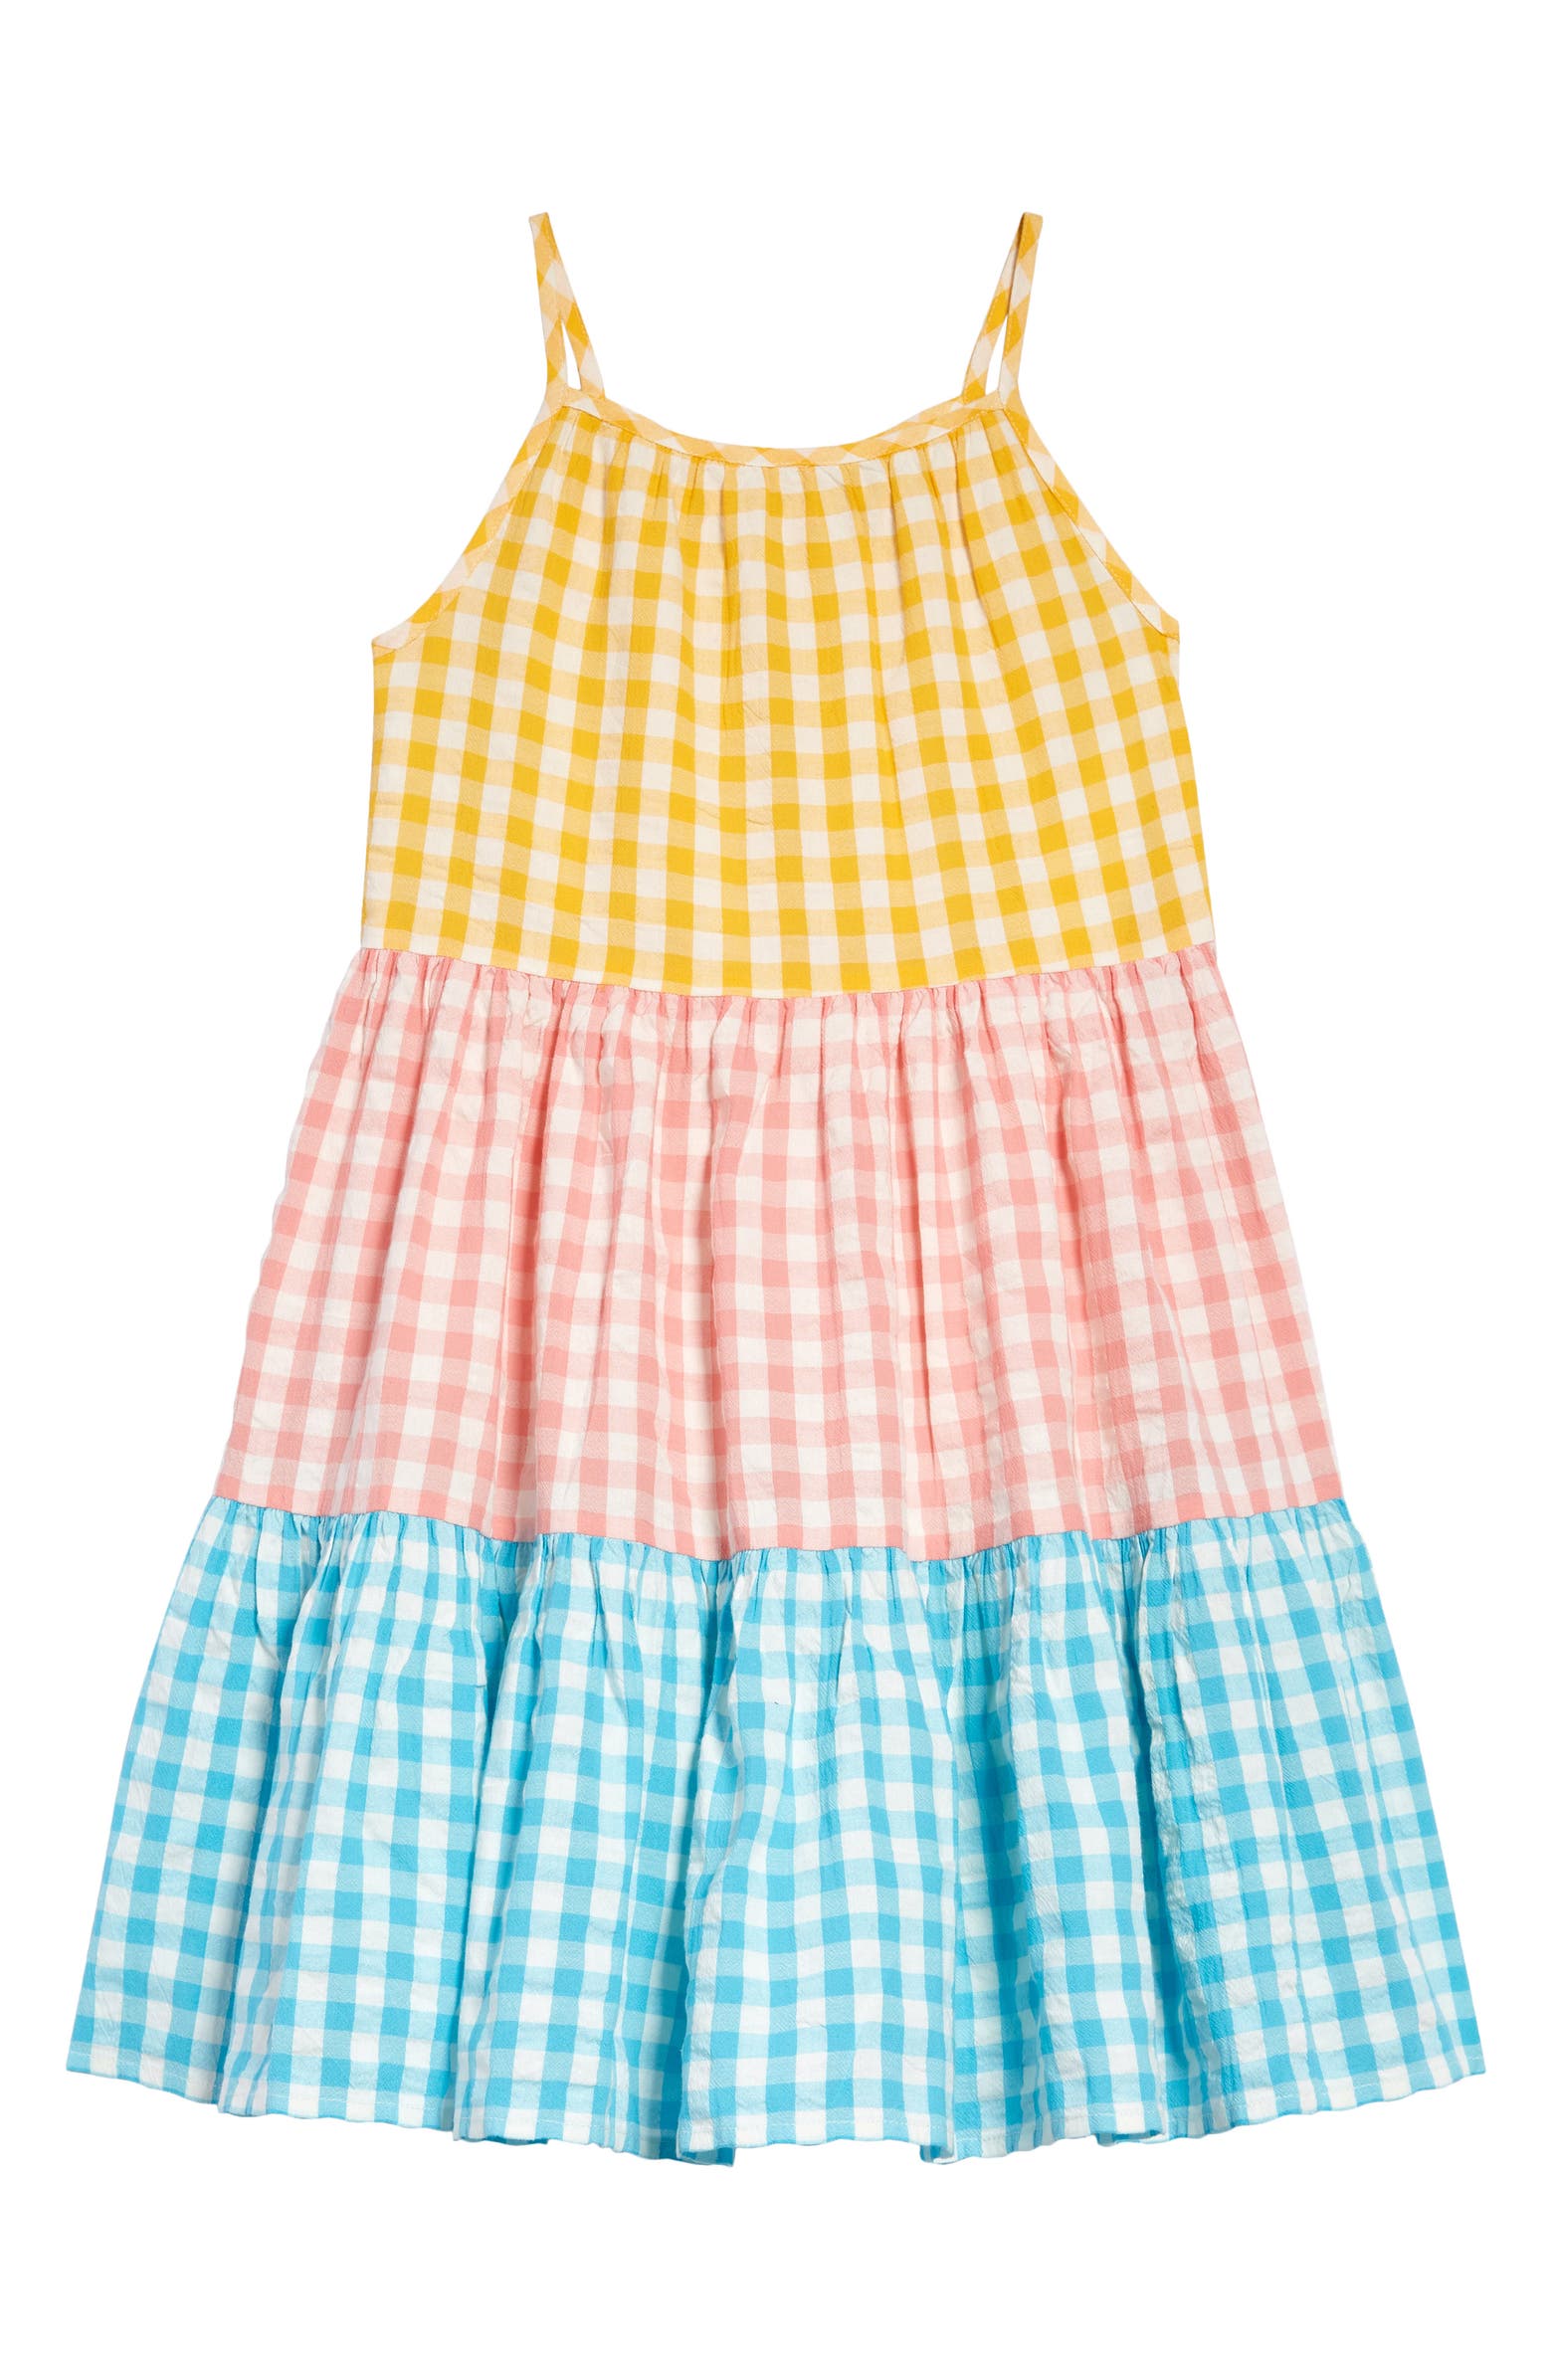 Tucker + Tate Kids' Gingham Tiered Trapeze Dress | Nordstrom